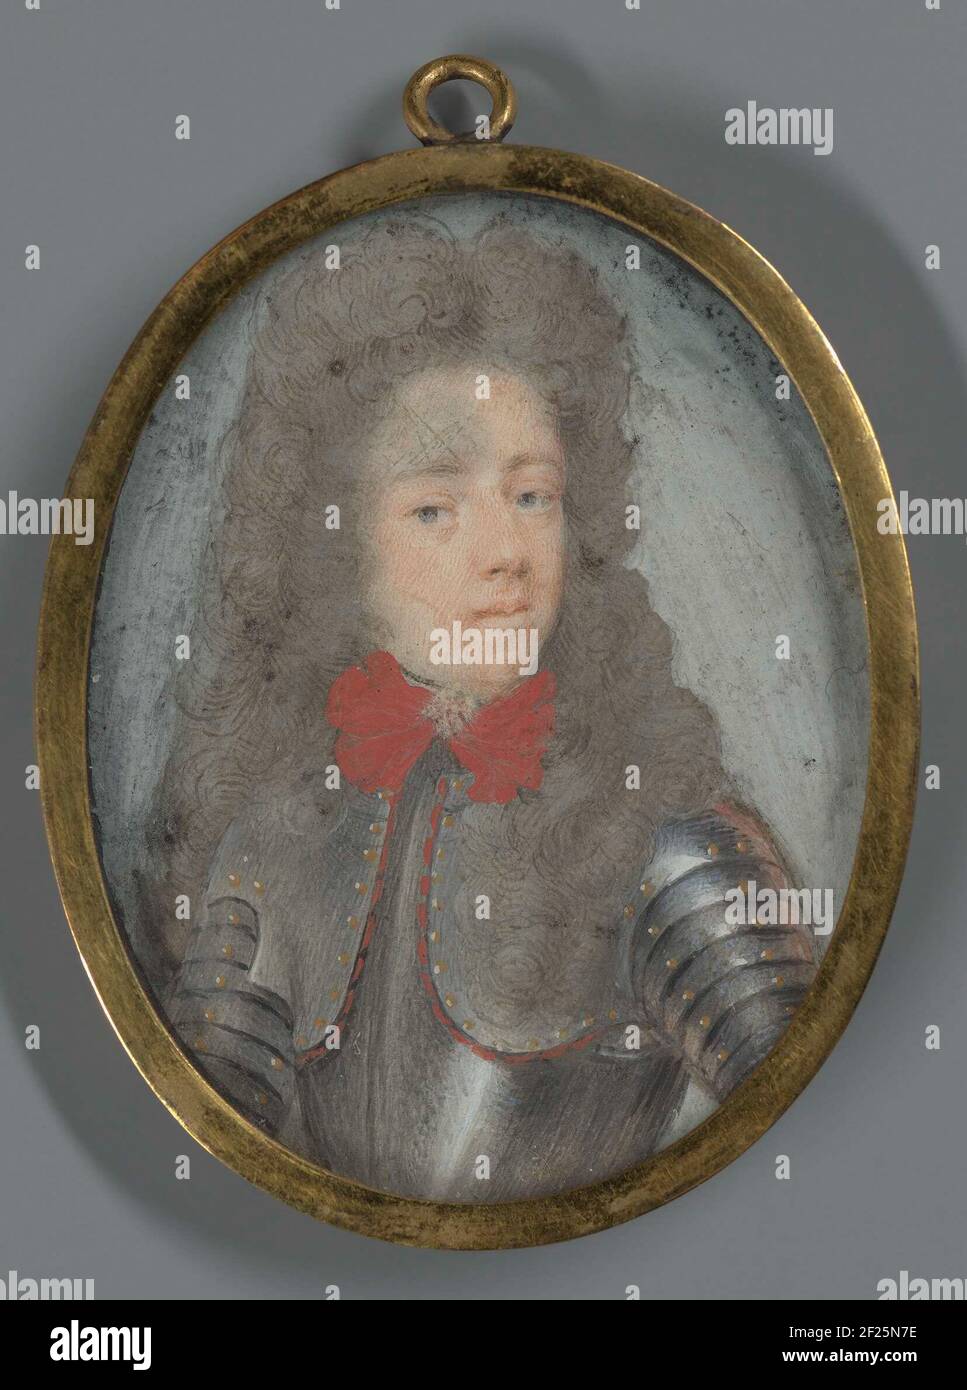 Portrait of Hendrik Casimir II (1657-96), Prince of Nassau-Dietz.Portrait of Hendrik Casimir II (1657-96), Prince of Nassau-Dietz. Bust, head to the right, in armor. To an original by Lancelot Volders. Pendant of SK-A-4313. Part of the portrait miniaturen collection. Stock Photo